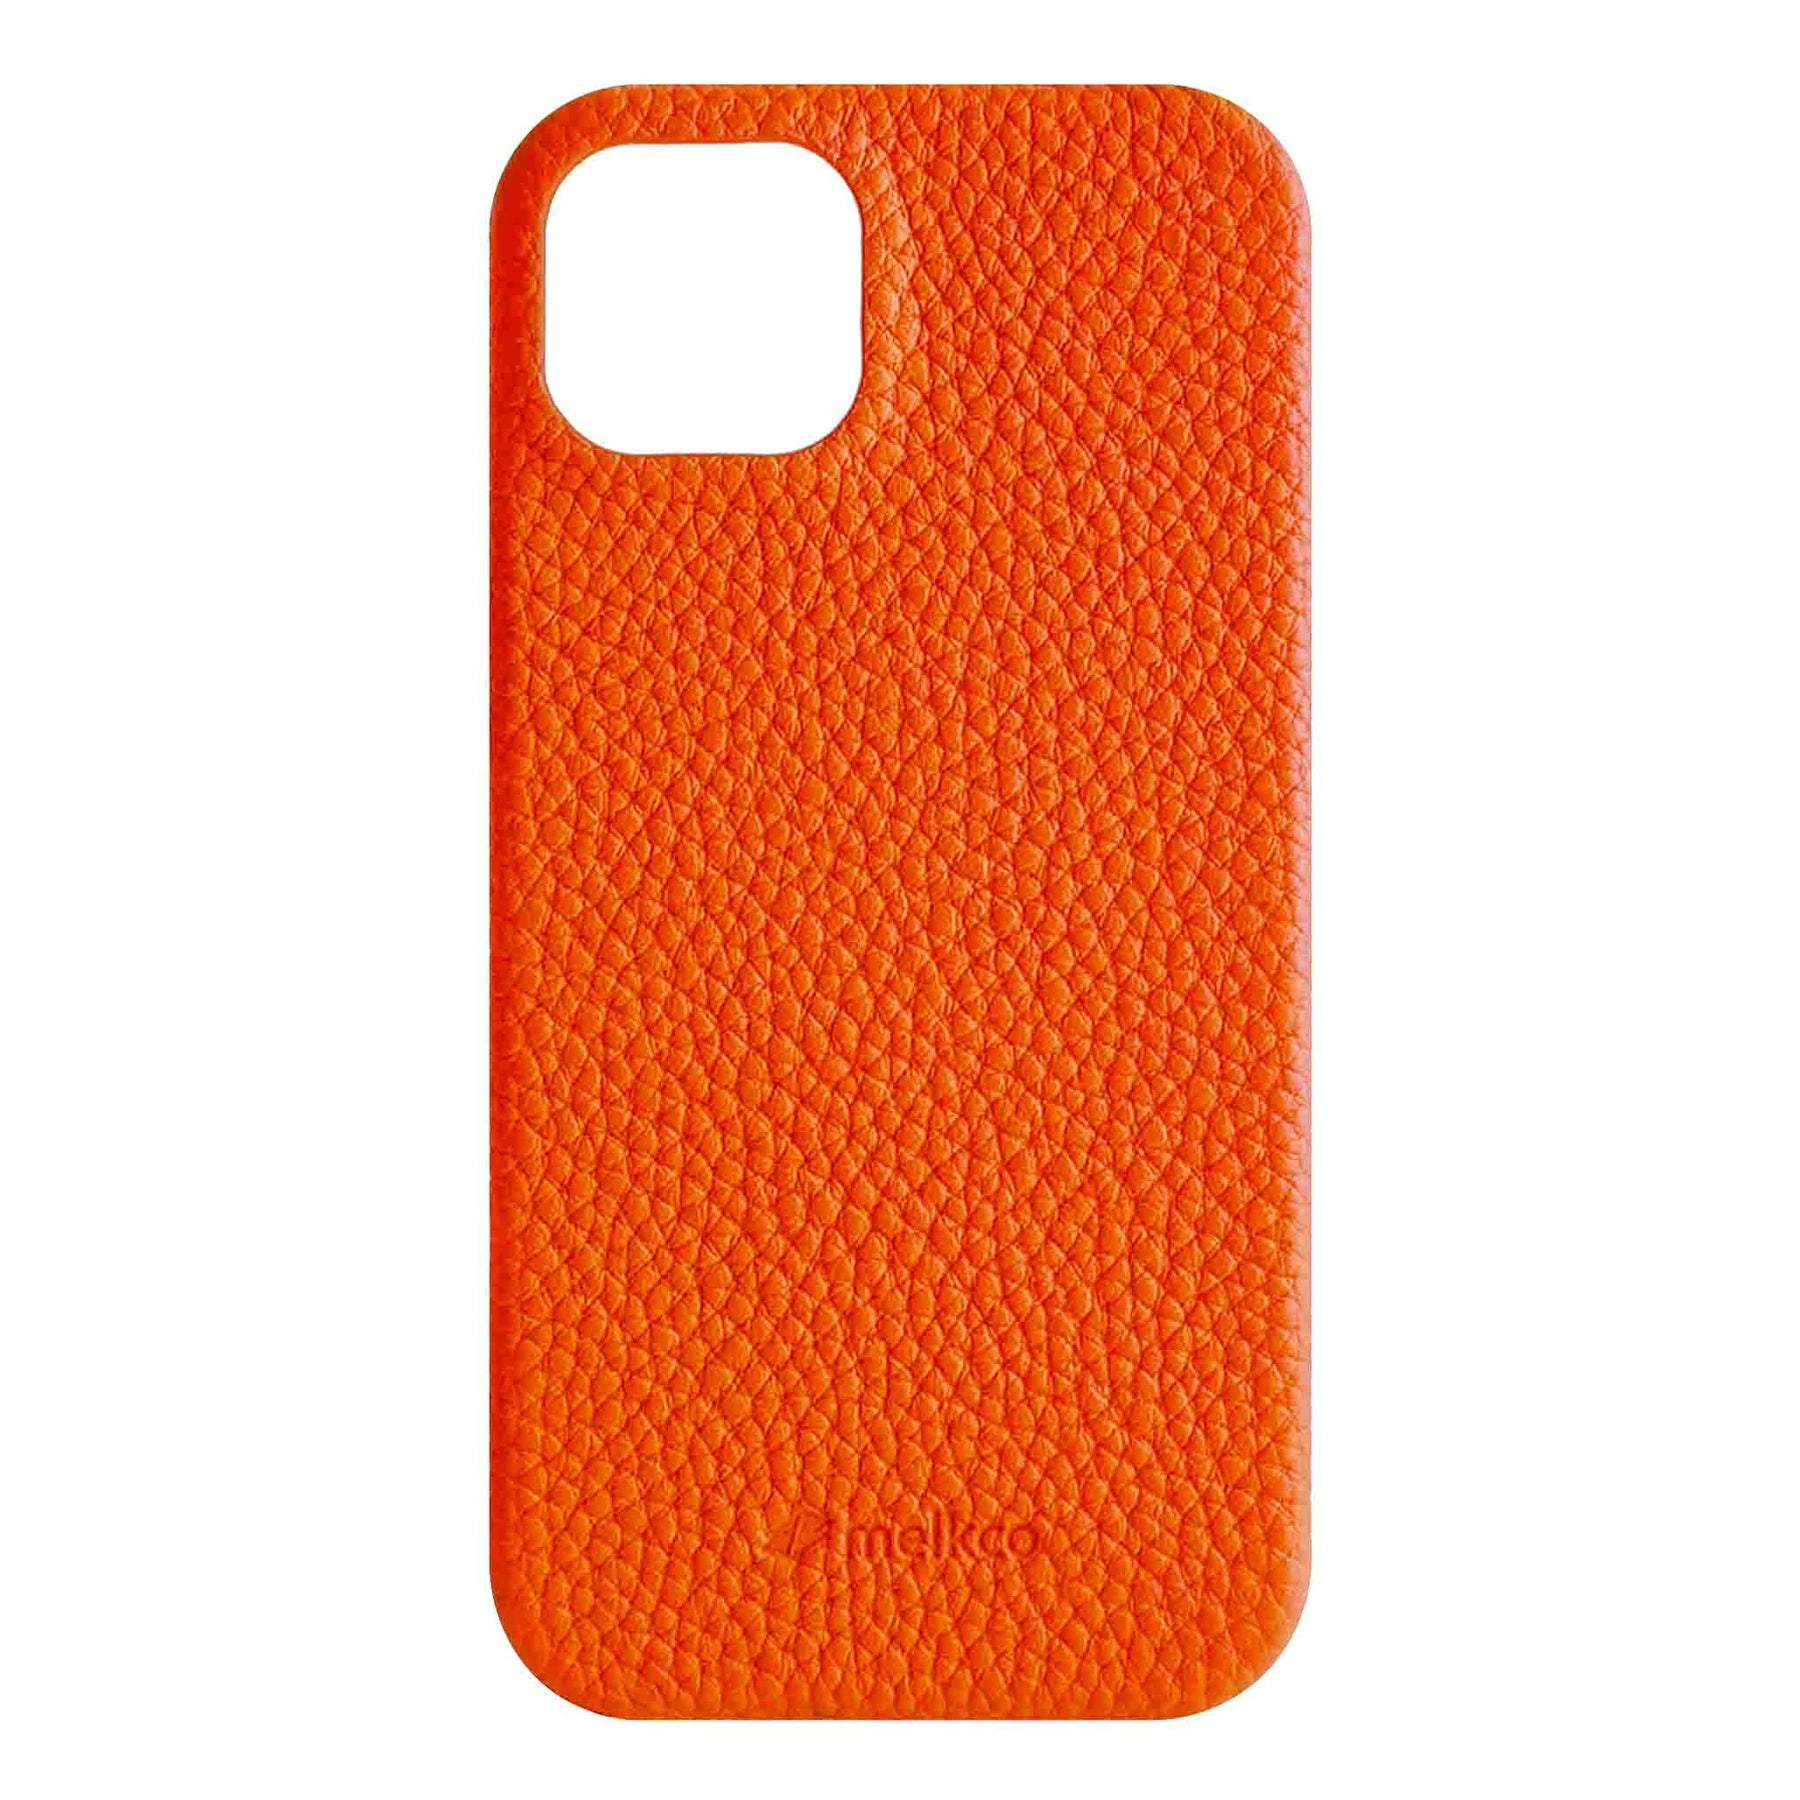 Apple iPhone - Leather Cover